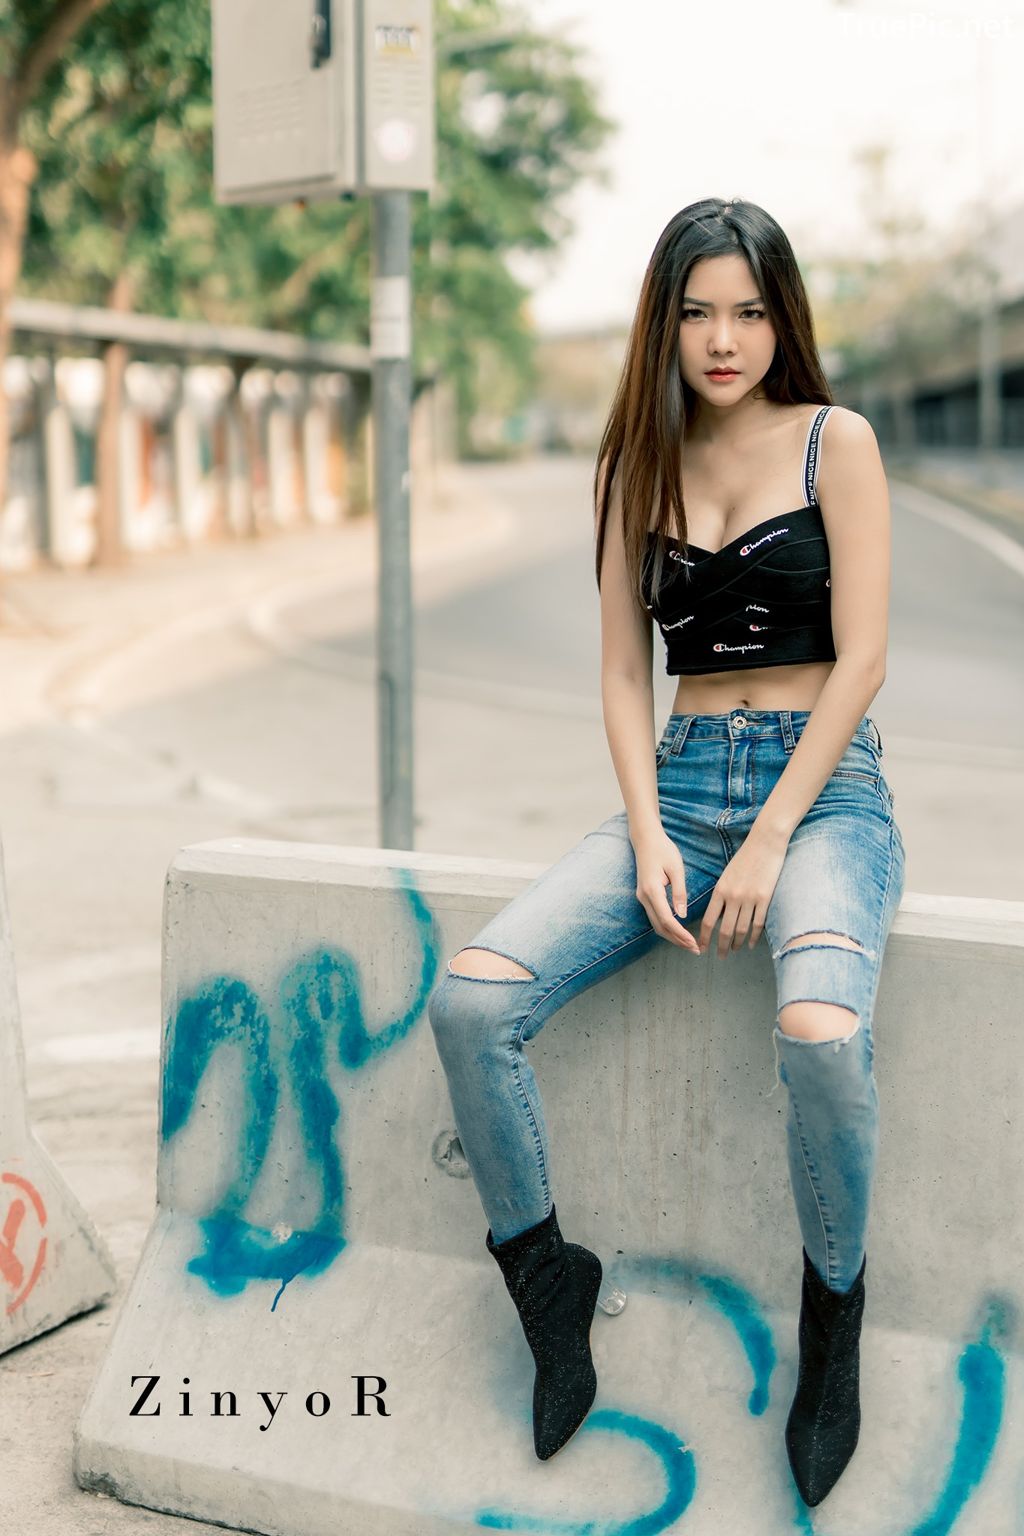 Image-Thailand-Model-Phitchamol-Srijantanet-Black-Crop-Top-and-Jean-TruePic.net- Picture-4